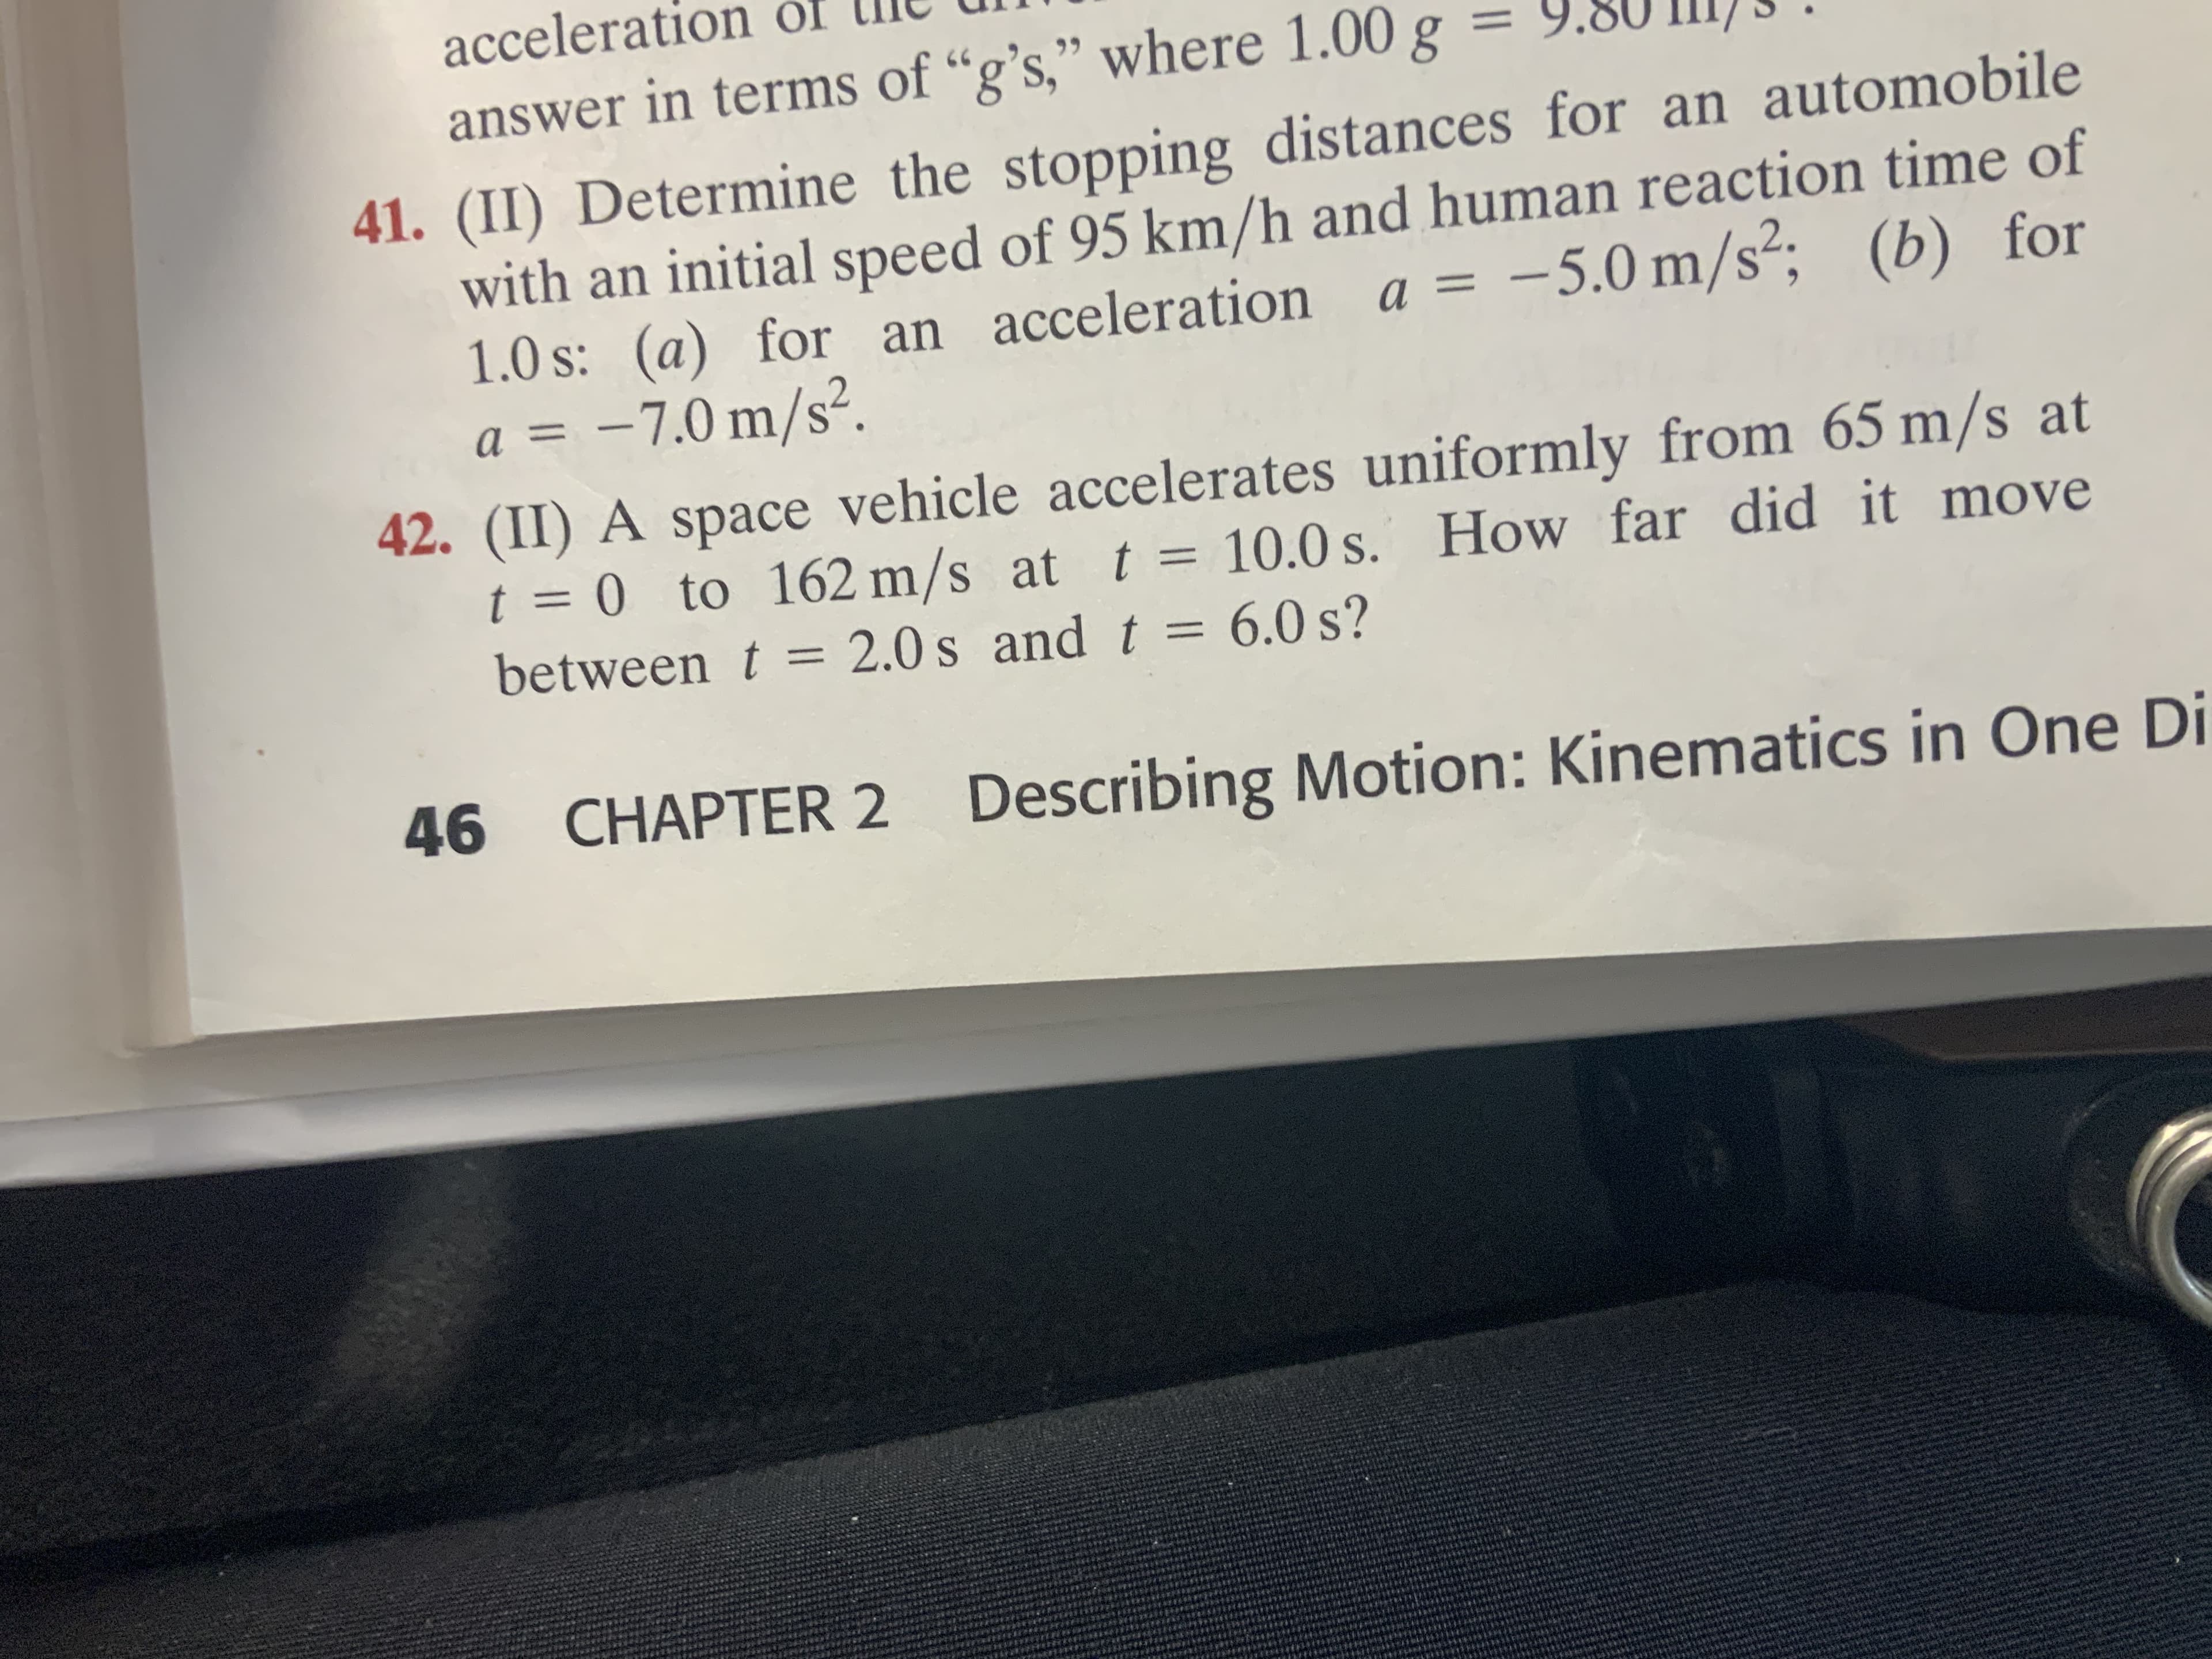 acceleration of
99
answer in terms of “g's," where 1.00 g
41. (II) Determine the stopping distances for an automobile
with an initial speed of 95 km/h and human reaction time of
1.0 s: (a) for an acceleration
–7.0 m/s².
a = -5.0 m/s²; (b) for
a =
42. (II) A space vehicle accelerates uniformly from 65 m/s at
t = 0 to 162 m/s at t
between t = 2.0 s and t = 6.0 s?
10.0 s. How far did it move
=
46
Describing Motion: Kinematics in One Di
CHAPTER 2
